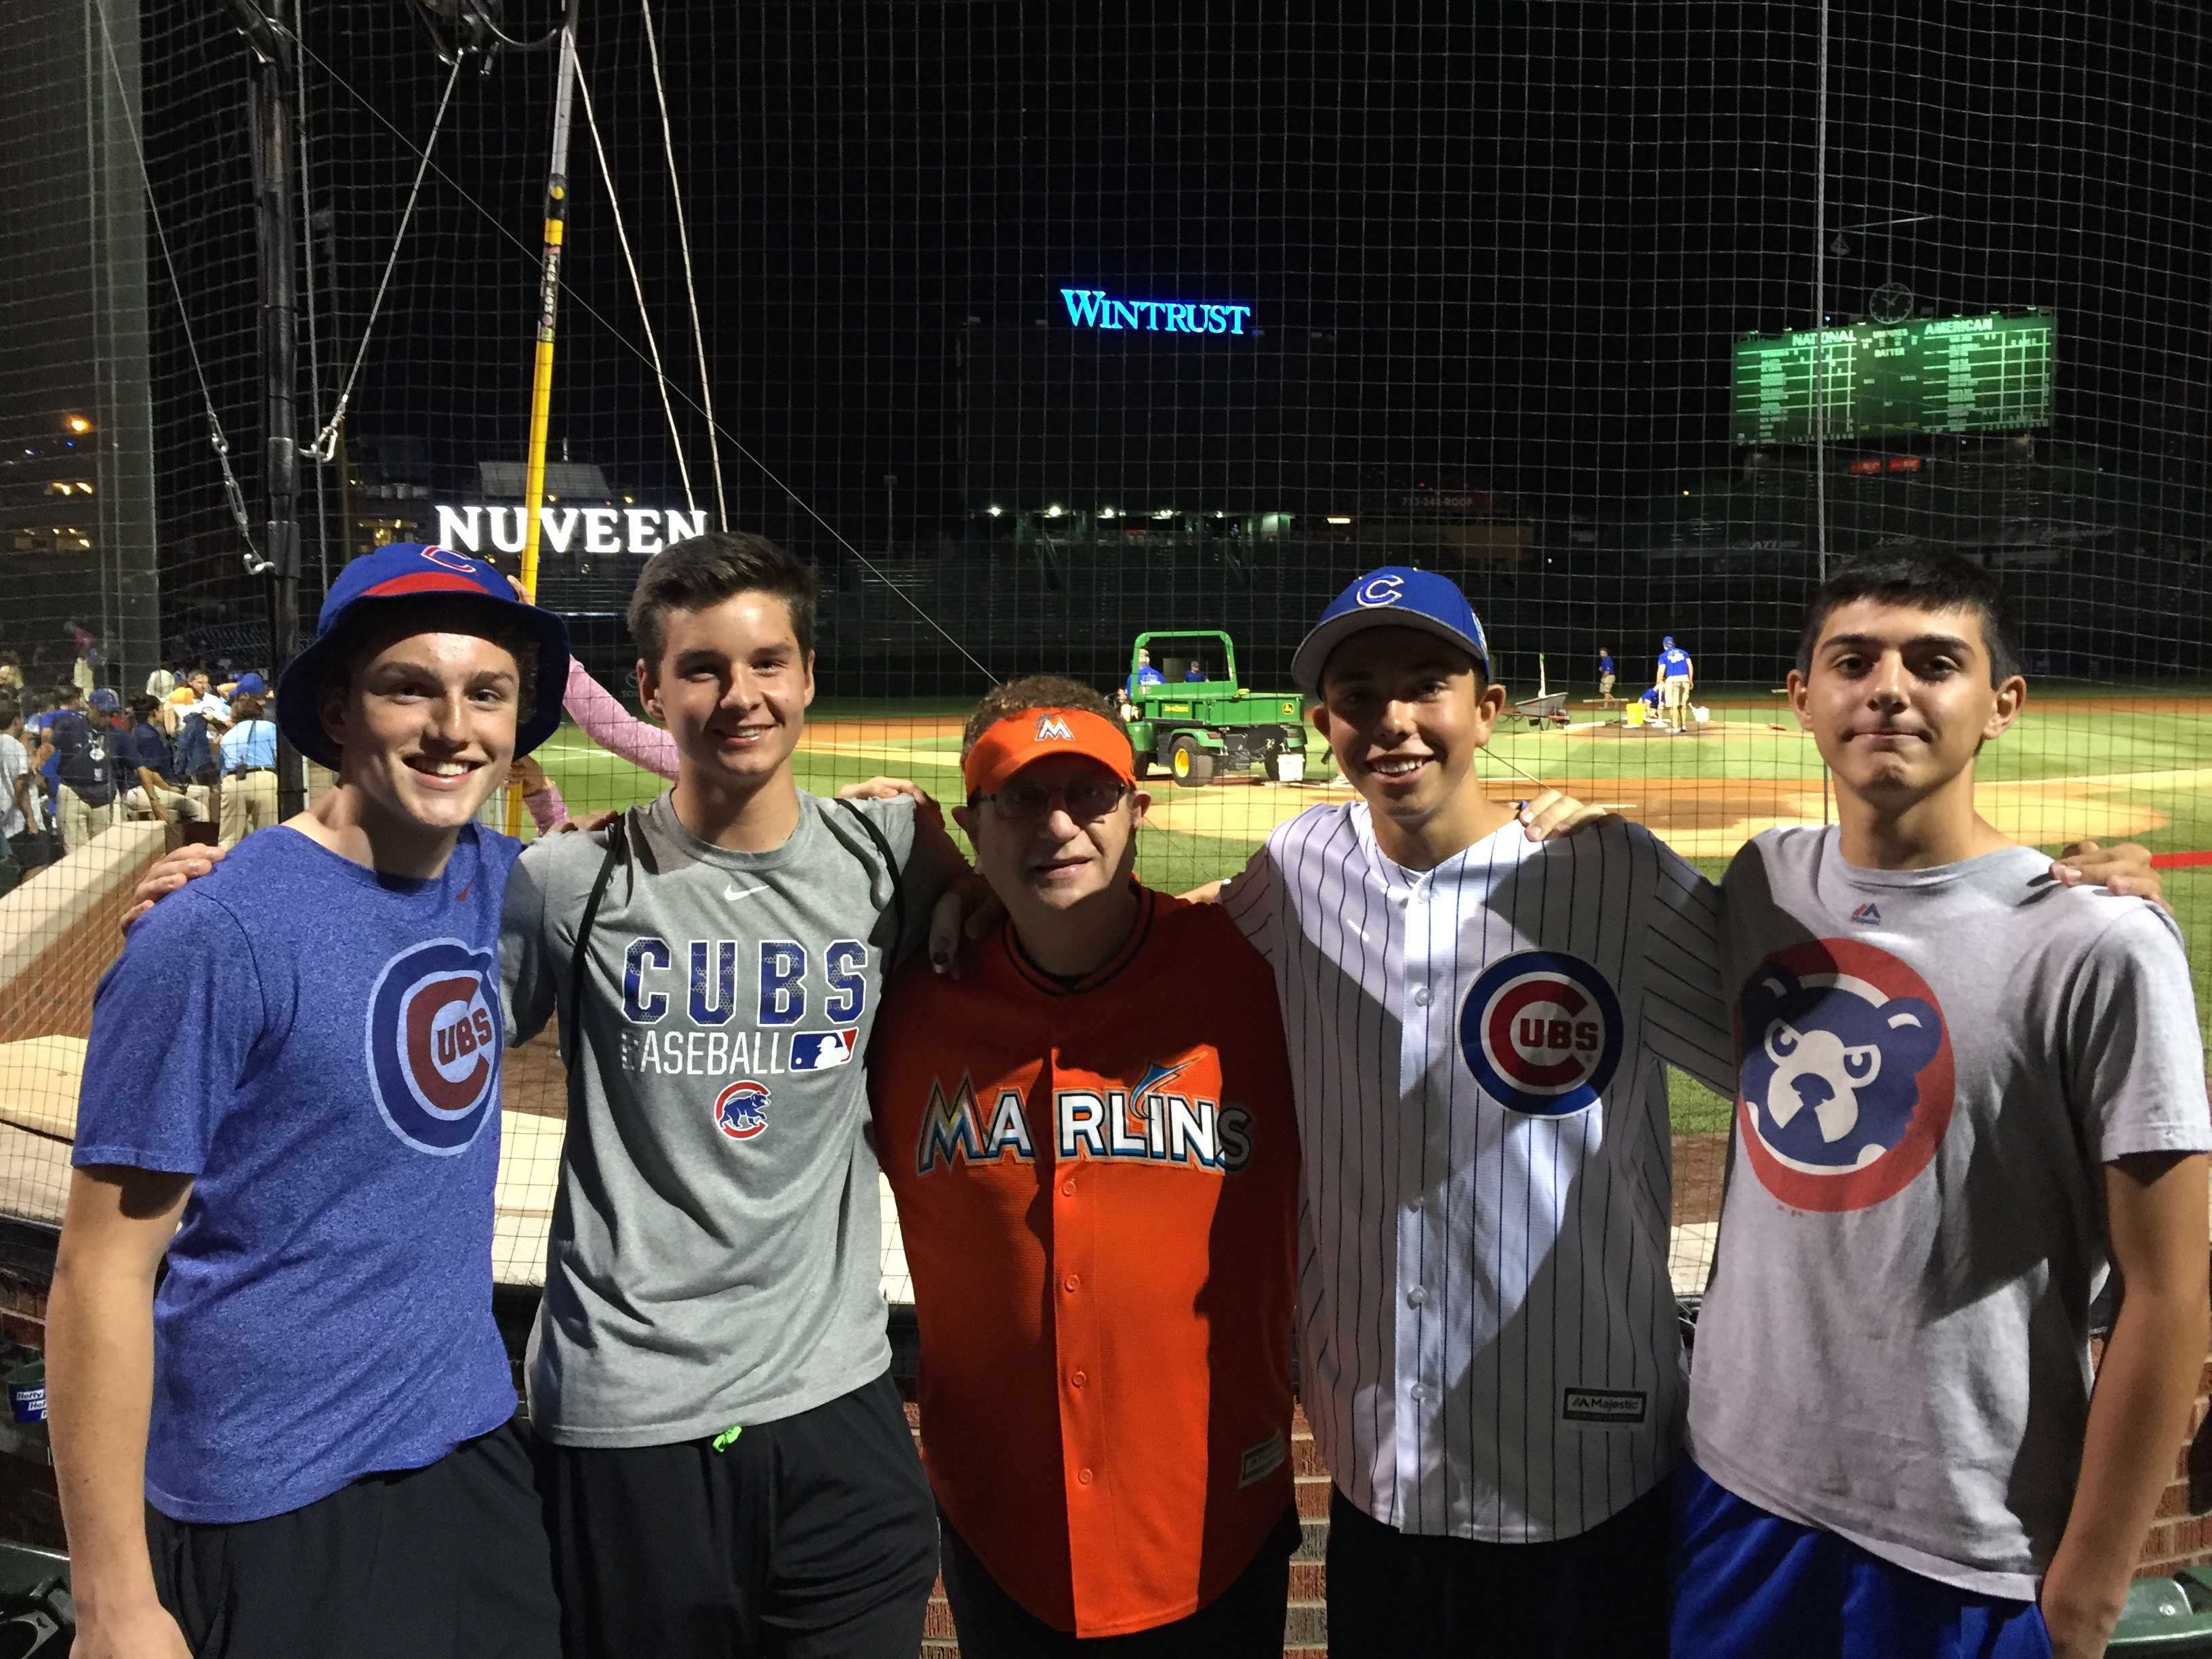 Writer junior Jack Ankony (second to right) and his friends pose with the Marlins Man at a Cubs game at Wrigley.